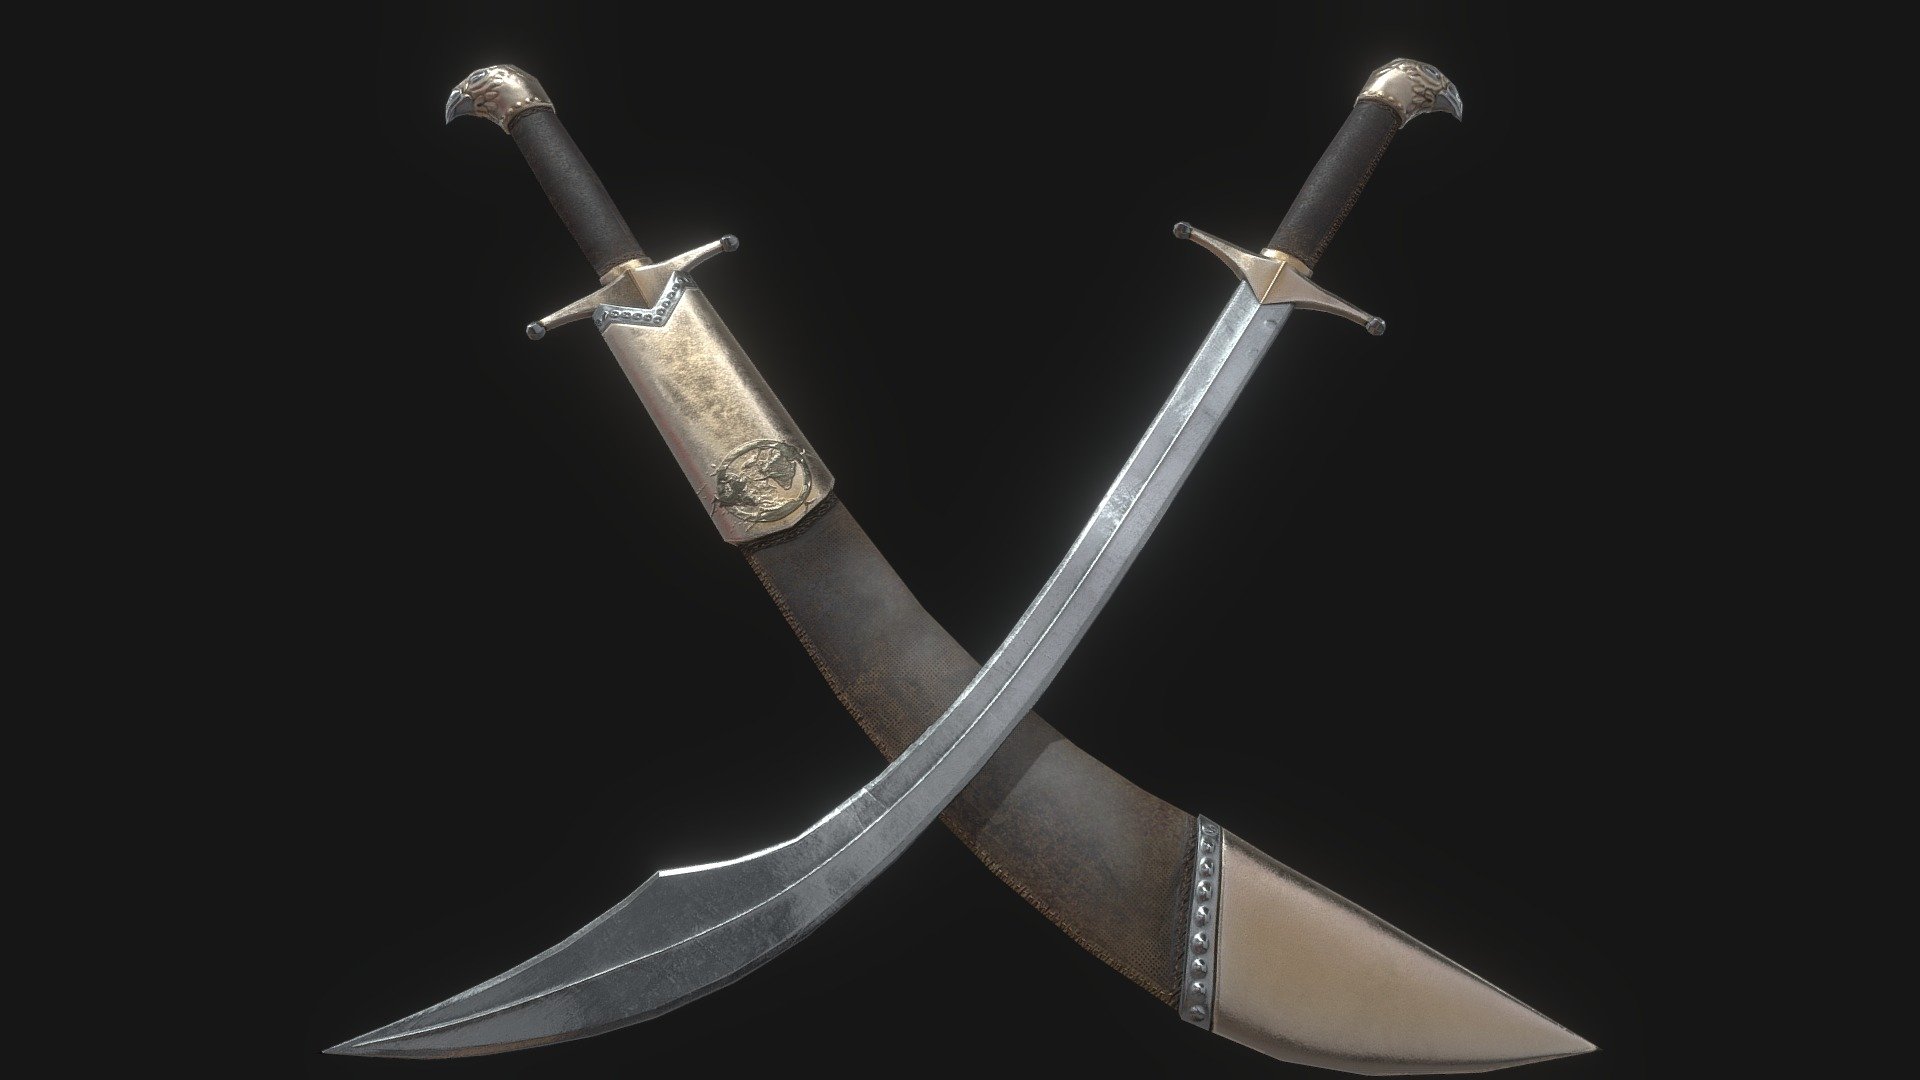 An eastern medieval Scimitar and Sheathe!

Designed for games in Low-poly PBR including Albedo, Normal, Metallic, AO, and Roughness 2K textures.

This model from Ferocious Industries can be found in 3 different material skins, and this one uses the ‘Dull Bronze’ texture set.

782 Triangles (One Sword + One Sheathe) 3d model